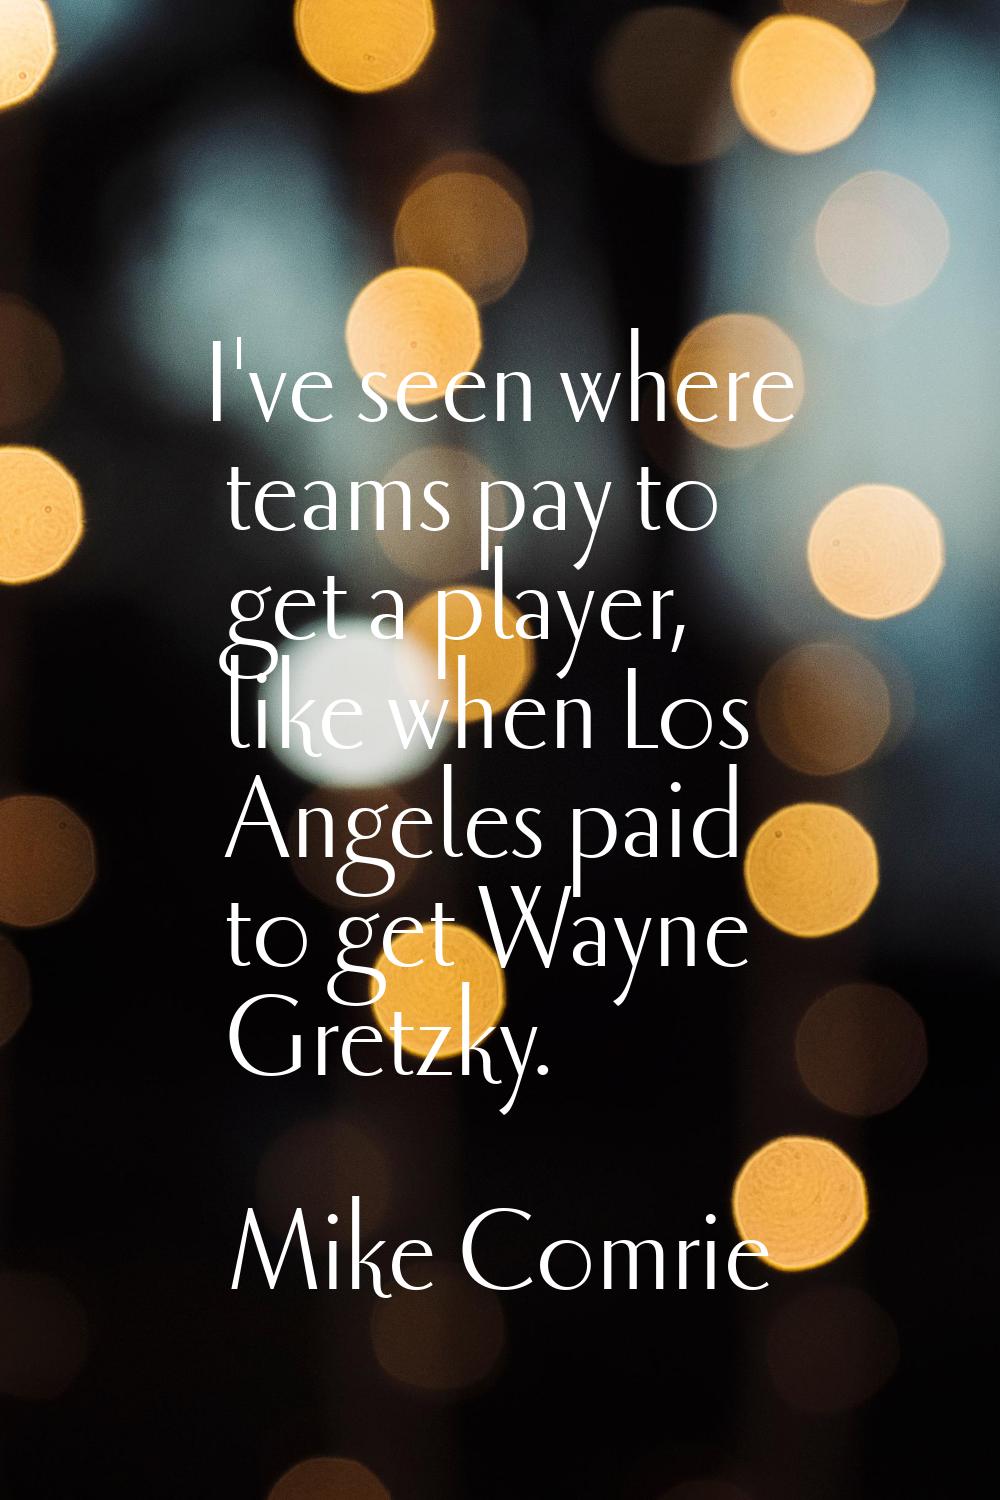 I've seen where teams pay to get a player, like when Los Angeles paid to get Wayne Gretzky.